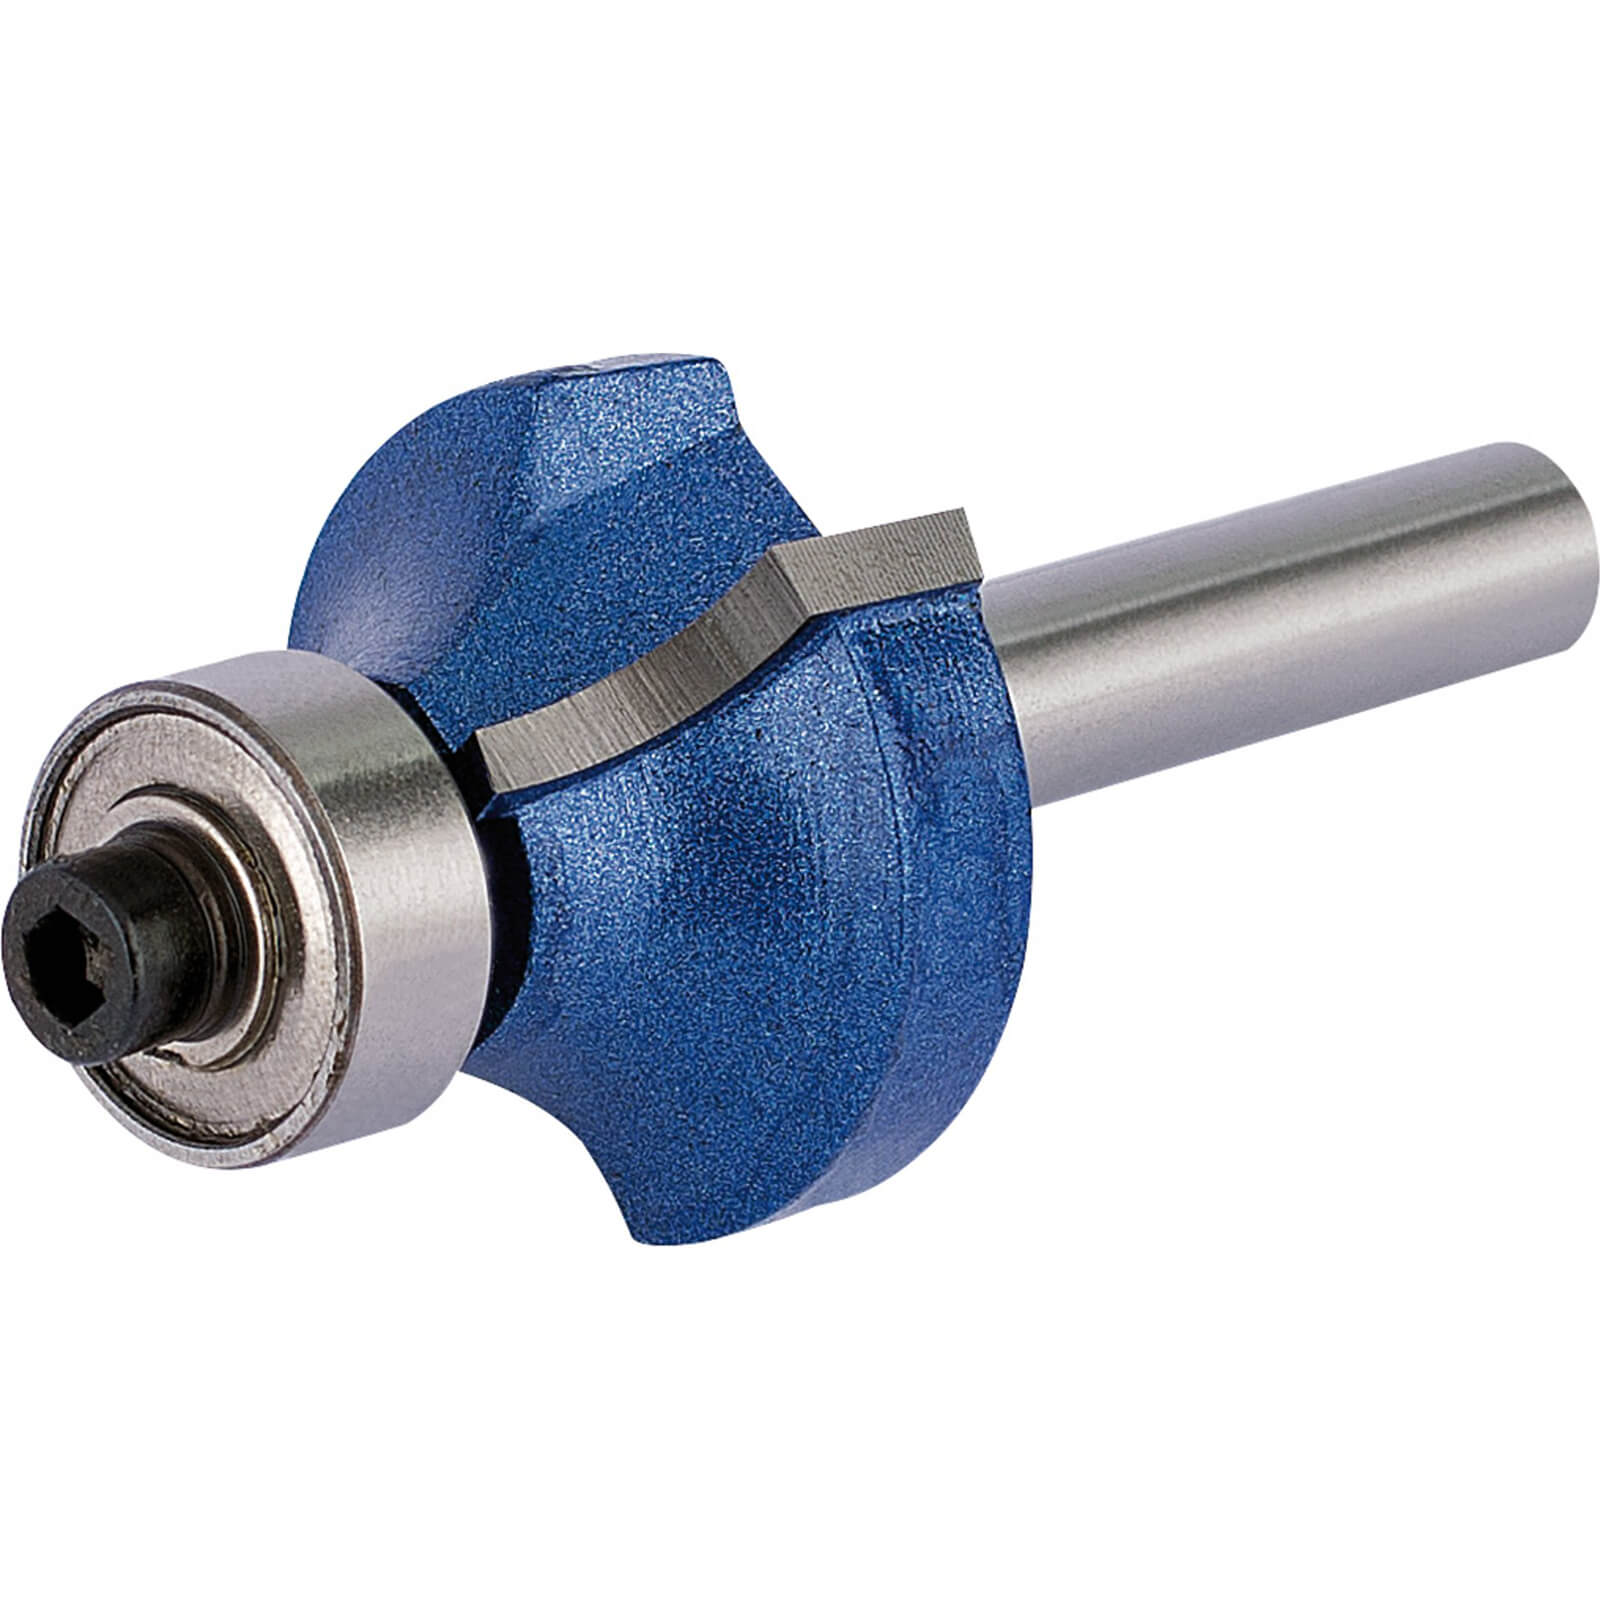 Image of Draper Bearing Guided Rounding Over Router Cutter 25mm 7mm 1/4"